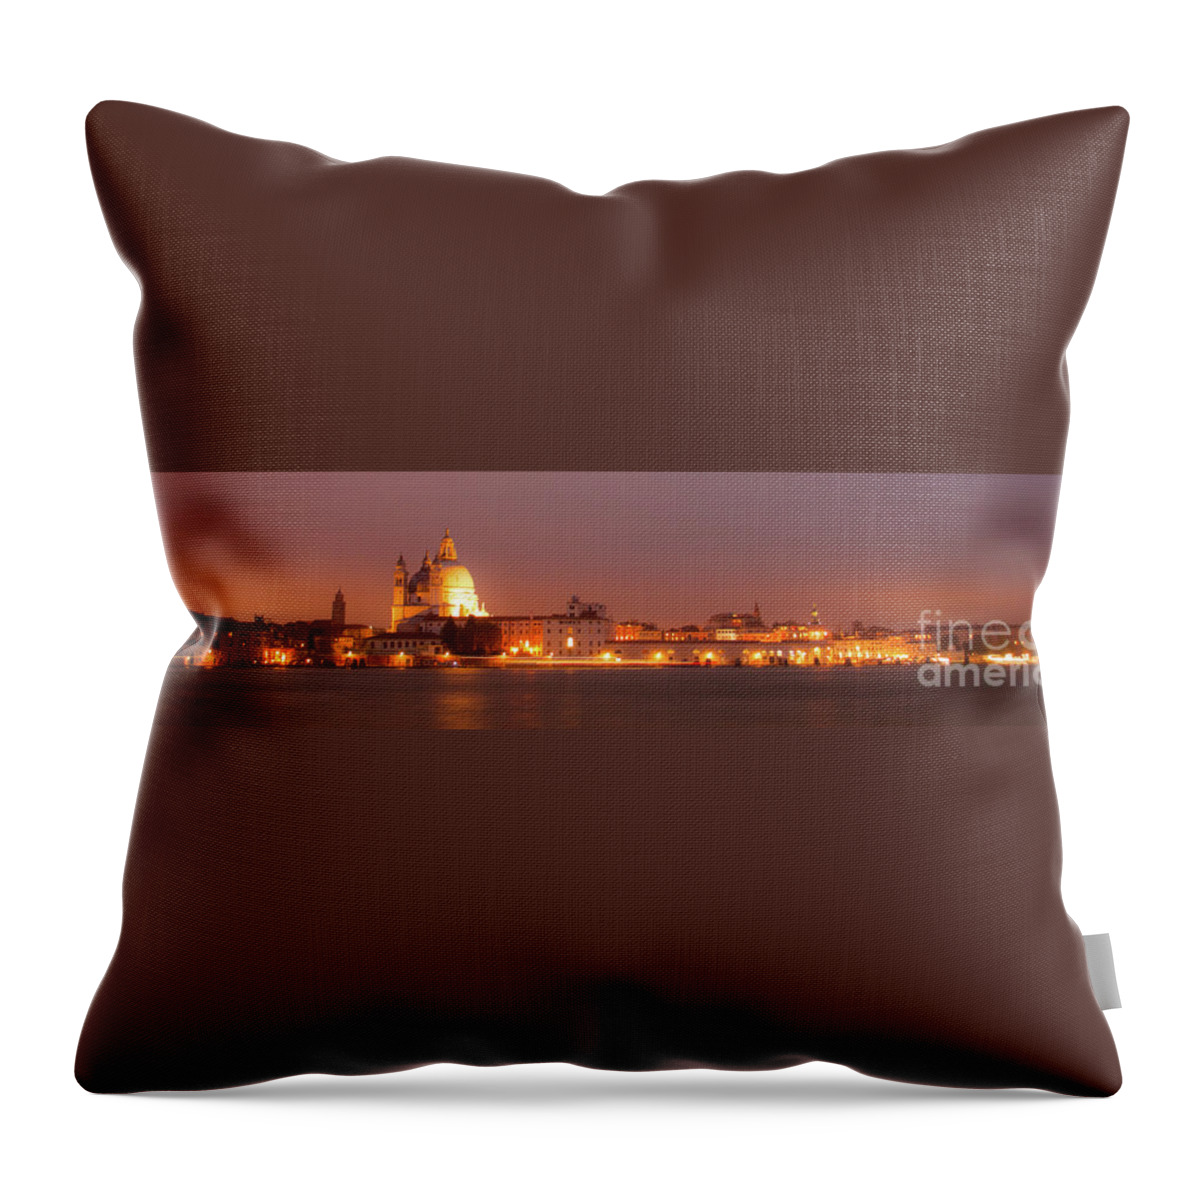 Bridge Throw Pillow featuring the photograph Panorama By Night Of Venice, italian City by Amanda Mohler